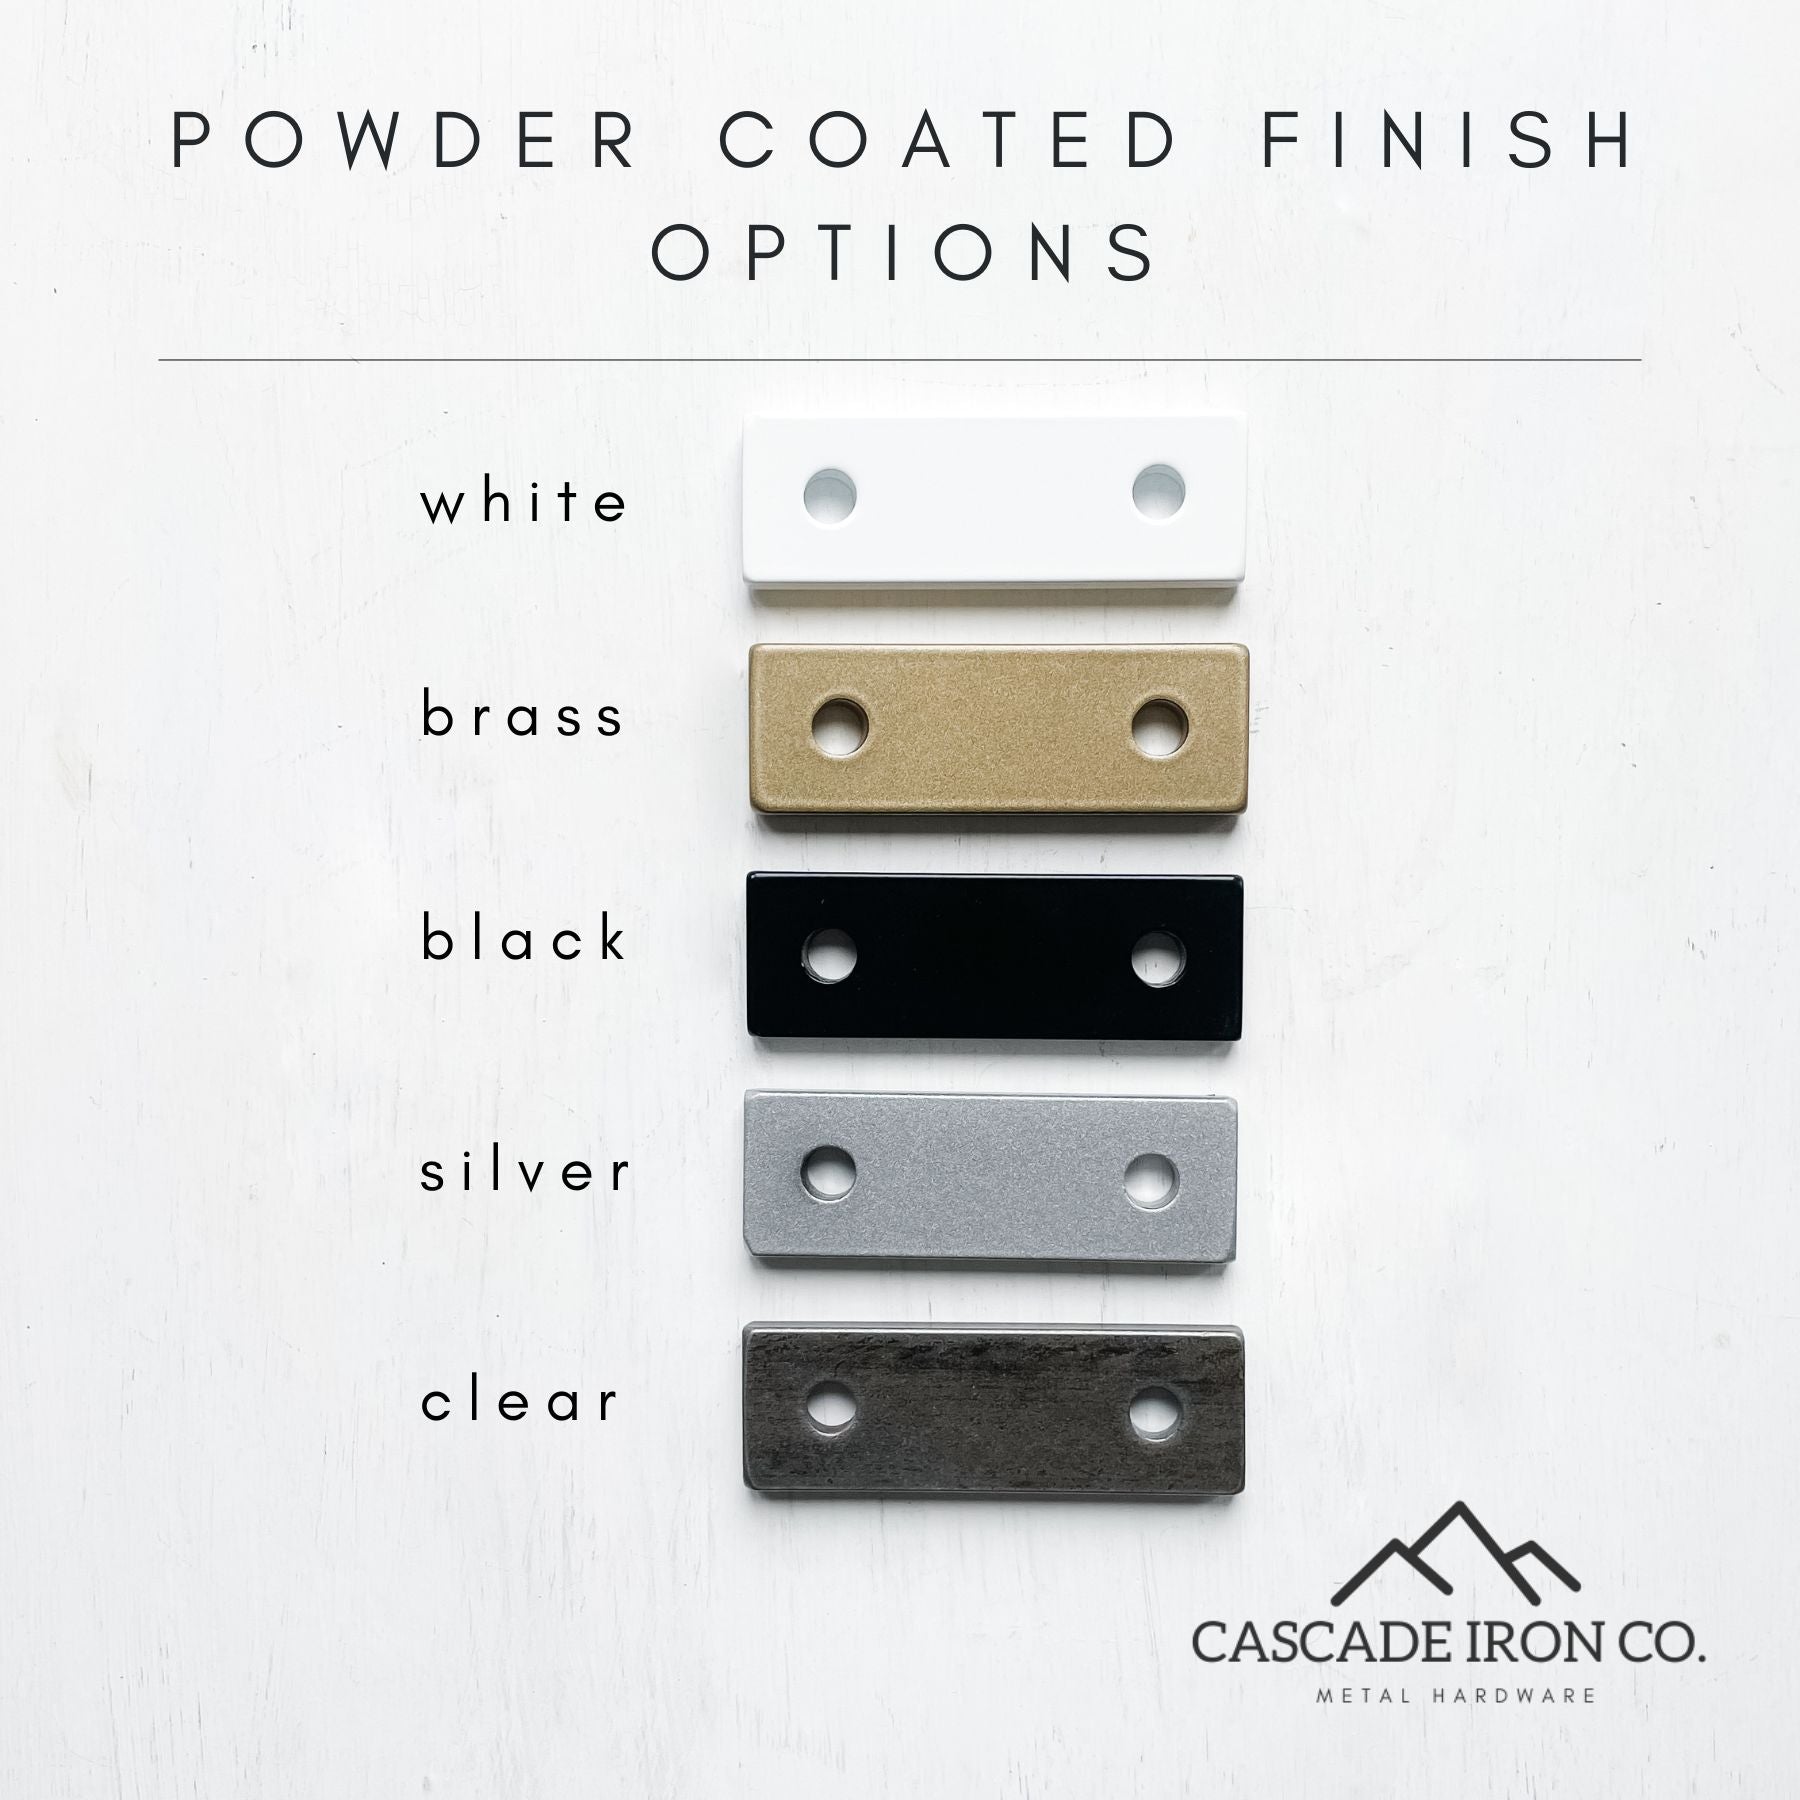 metal finish samples for cascade iron co